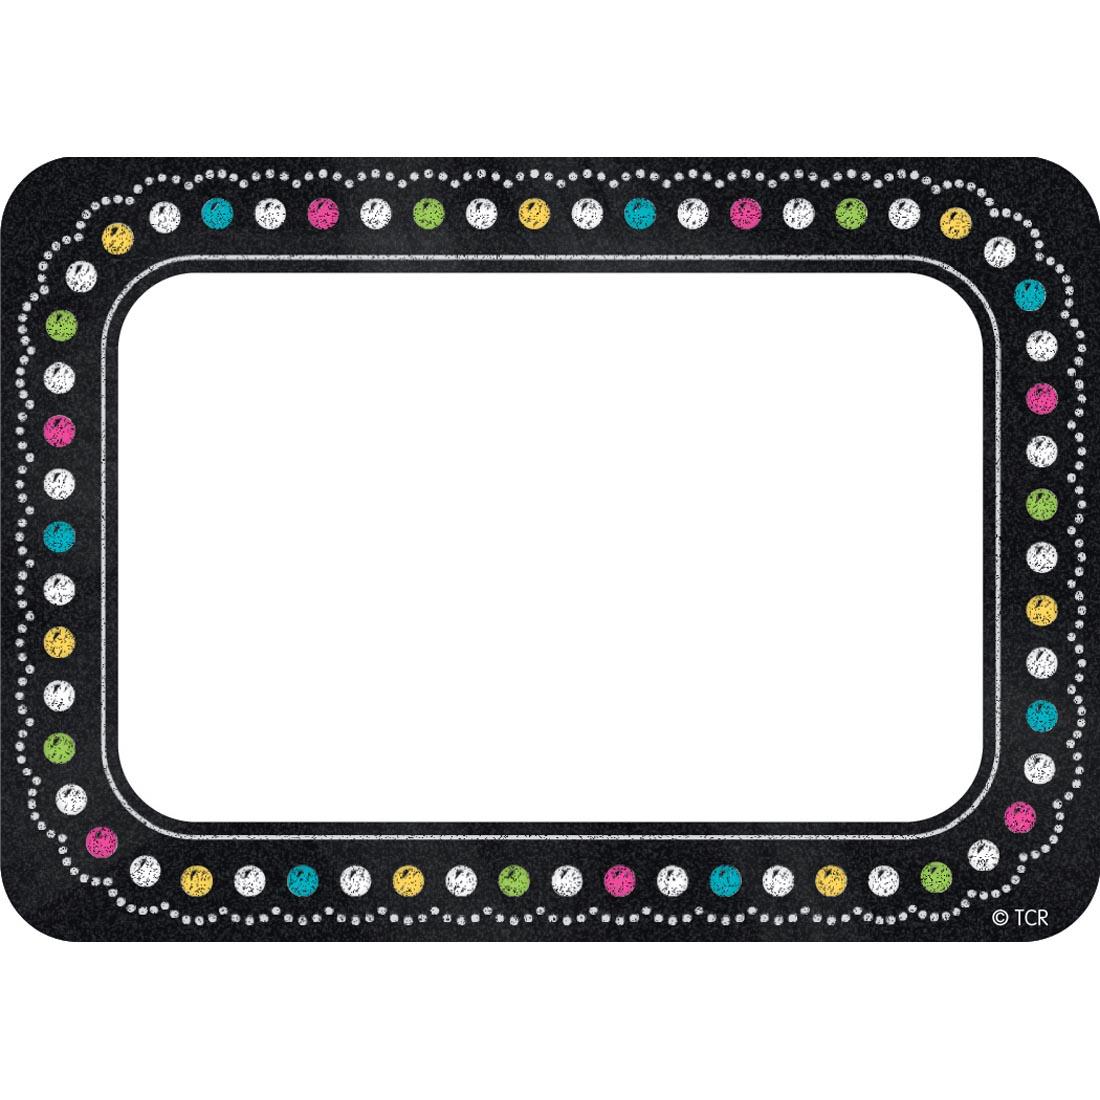 Name Tag from the Chalkboard Brights collection by Teacher Created Resources